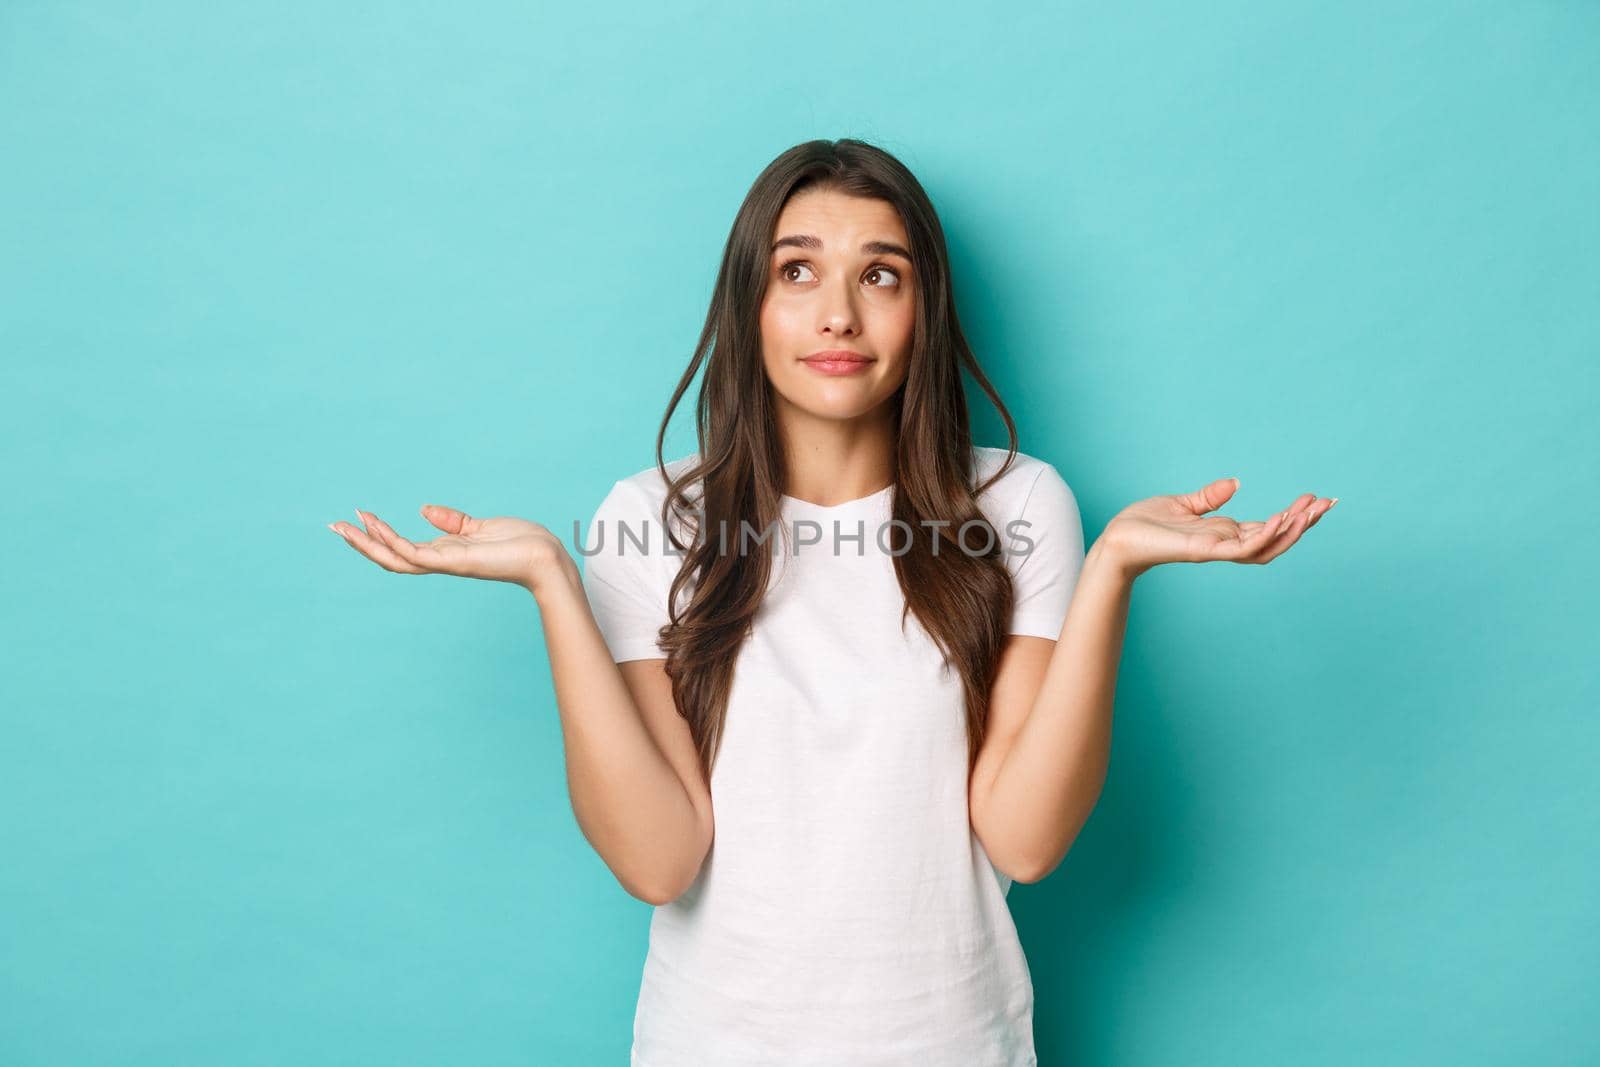 Image of pretty brunette woman in white t-shirt, dont know anything, shrugging and smiling clueless, standing over blue background.